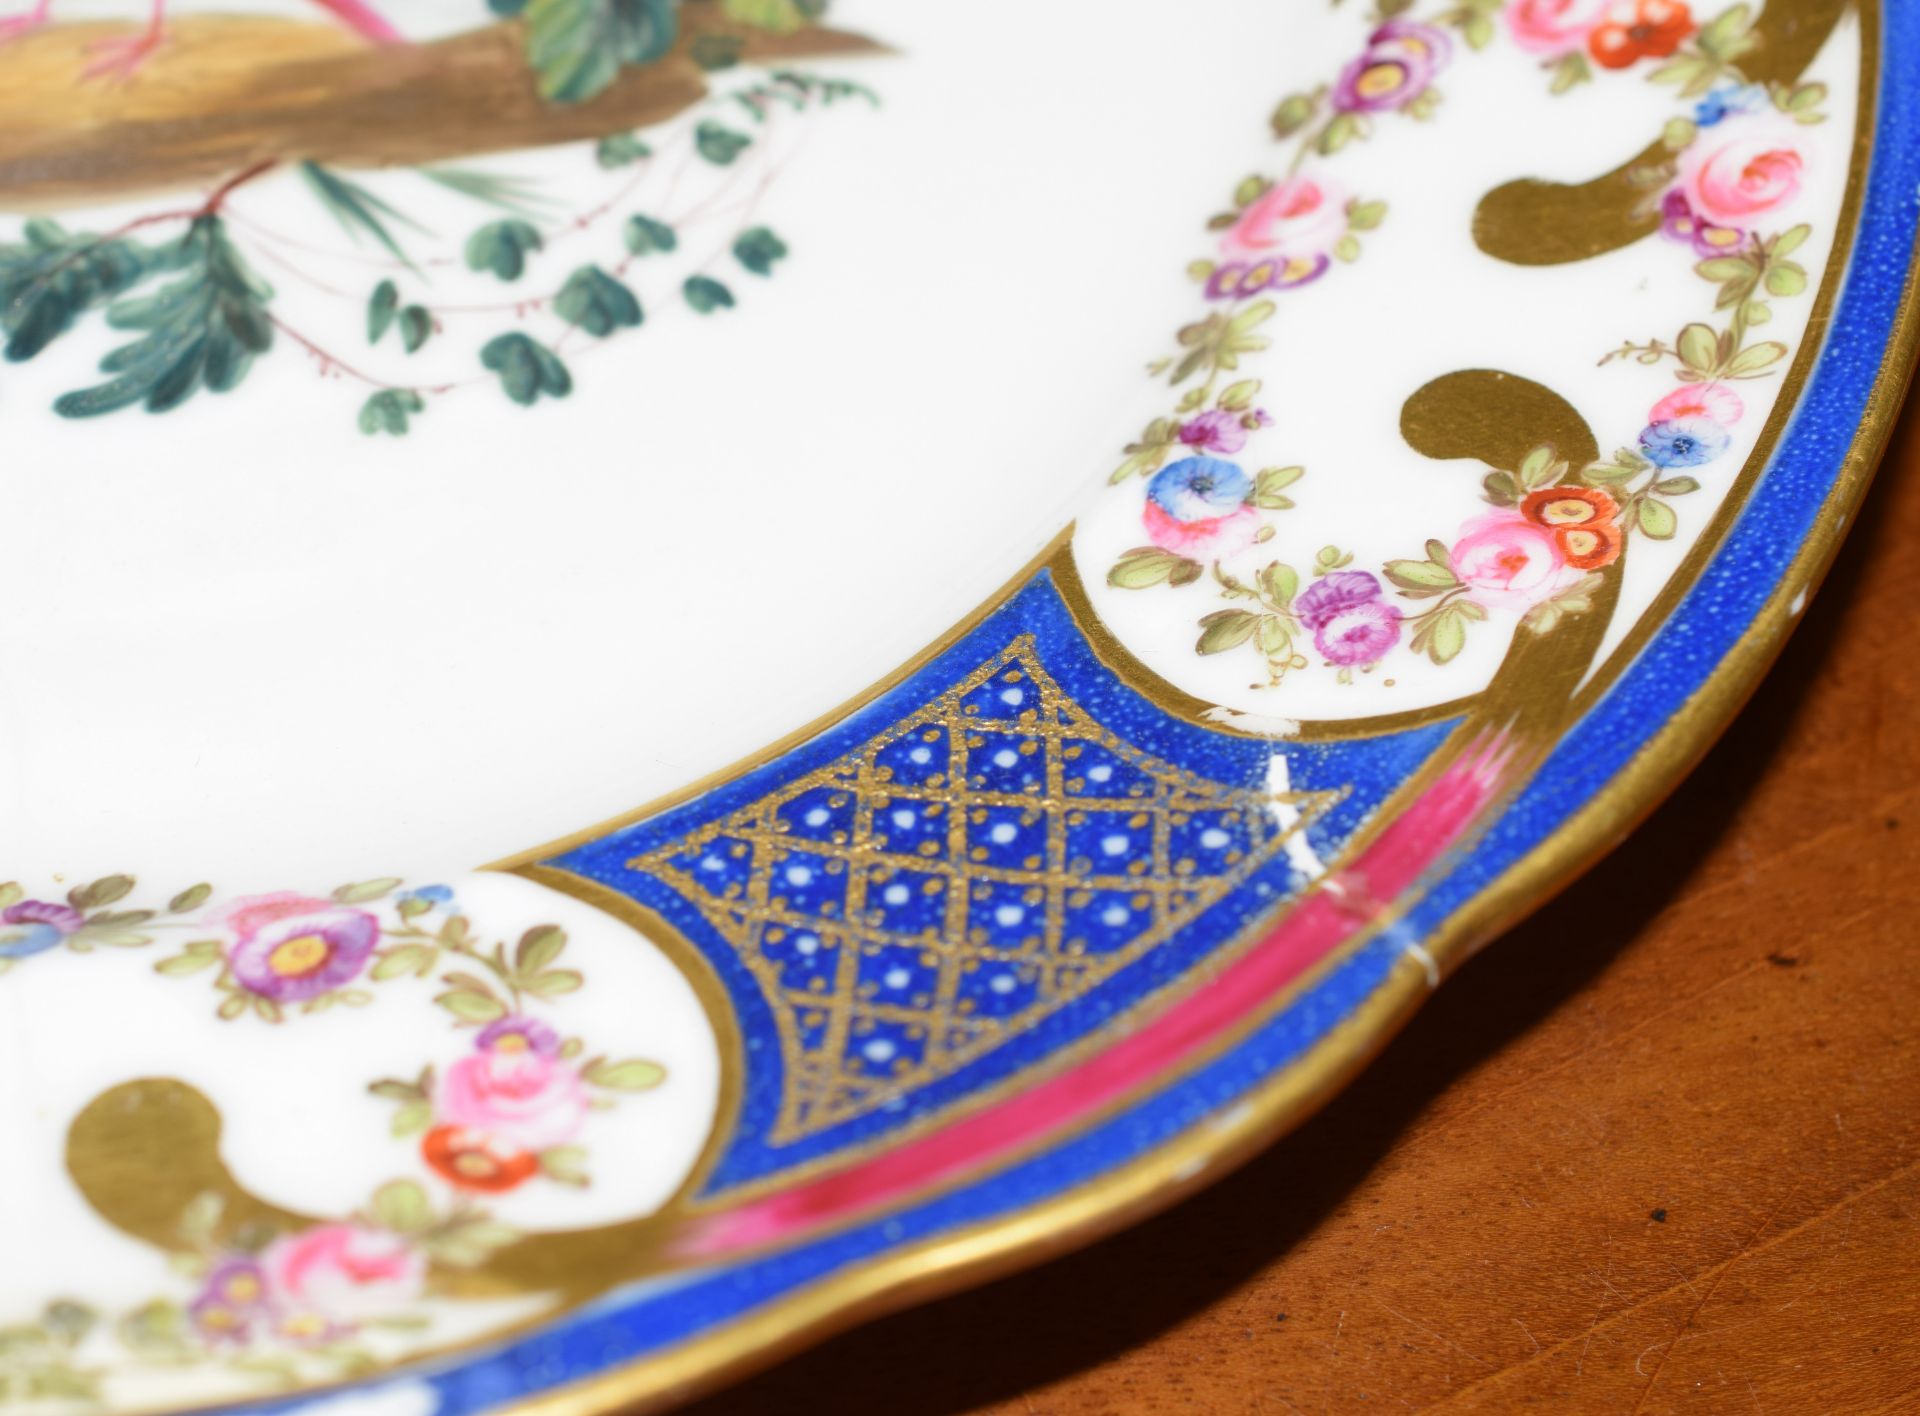 Nantgarw Hand-Painted Cabinet Plate c1815 - Image 3 of 9